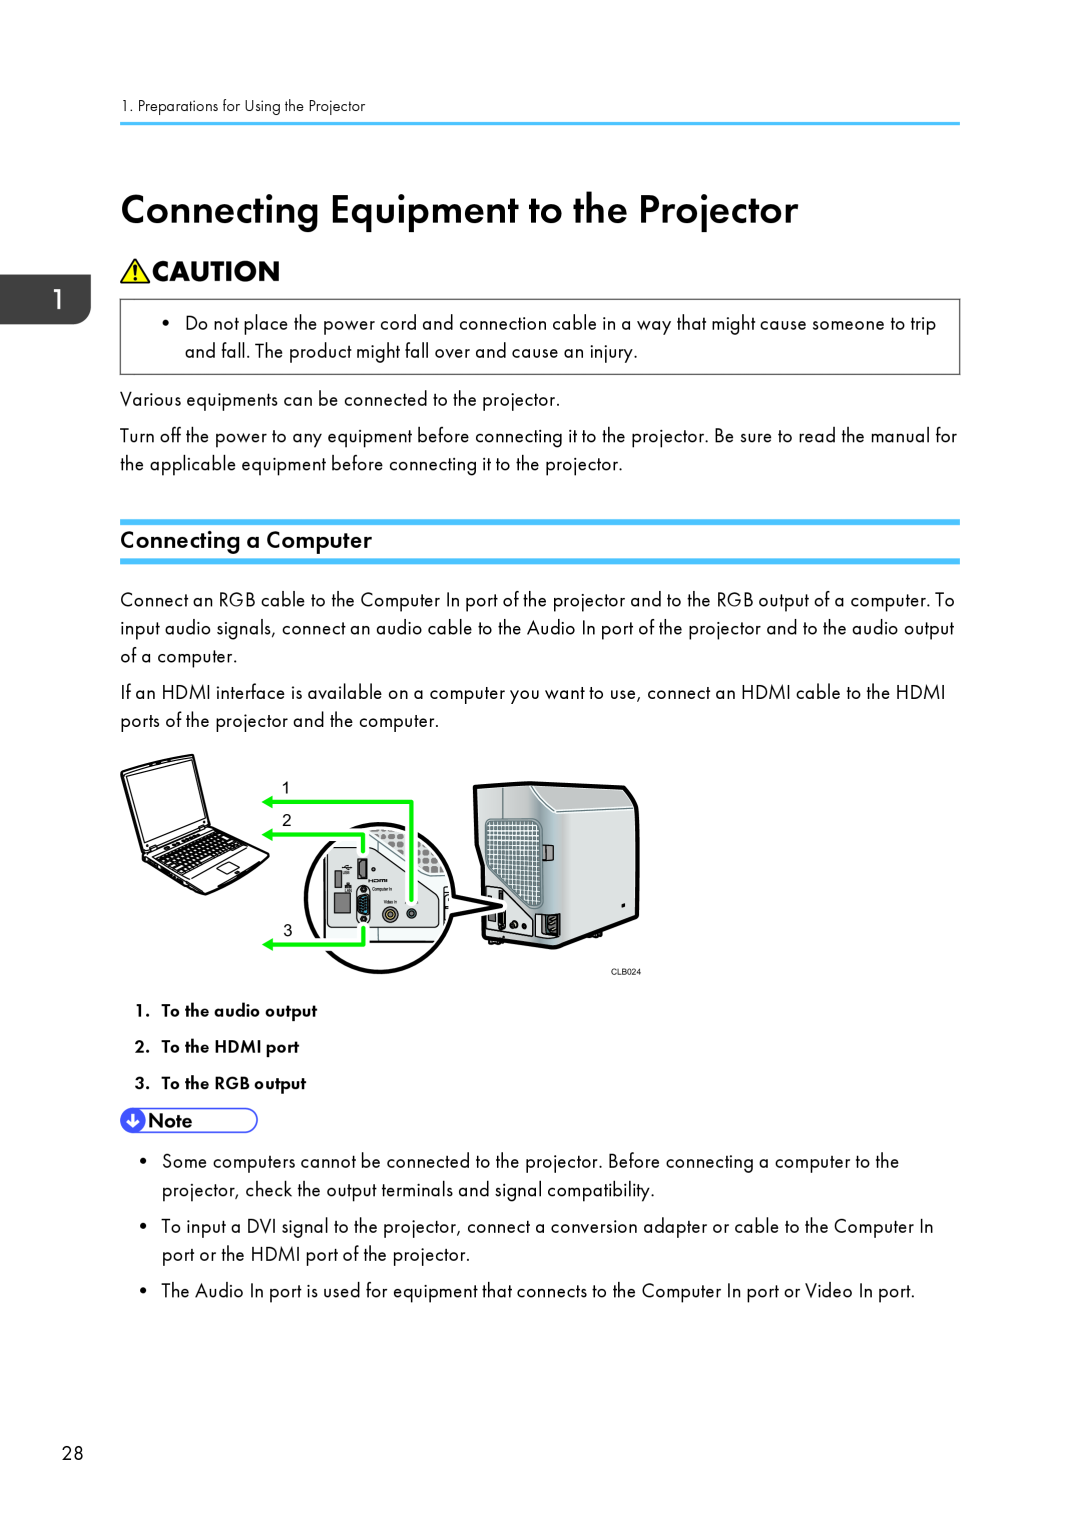 Ricoh WX4130n operating instructions Connecting Equipment to the Projector, Connecting a Computer 